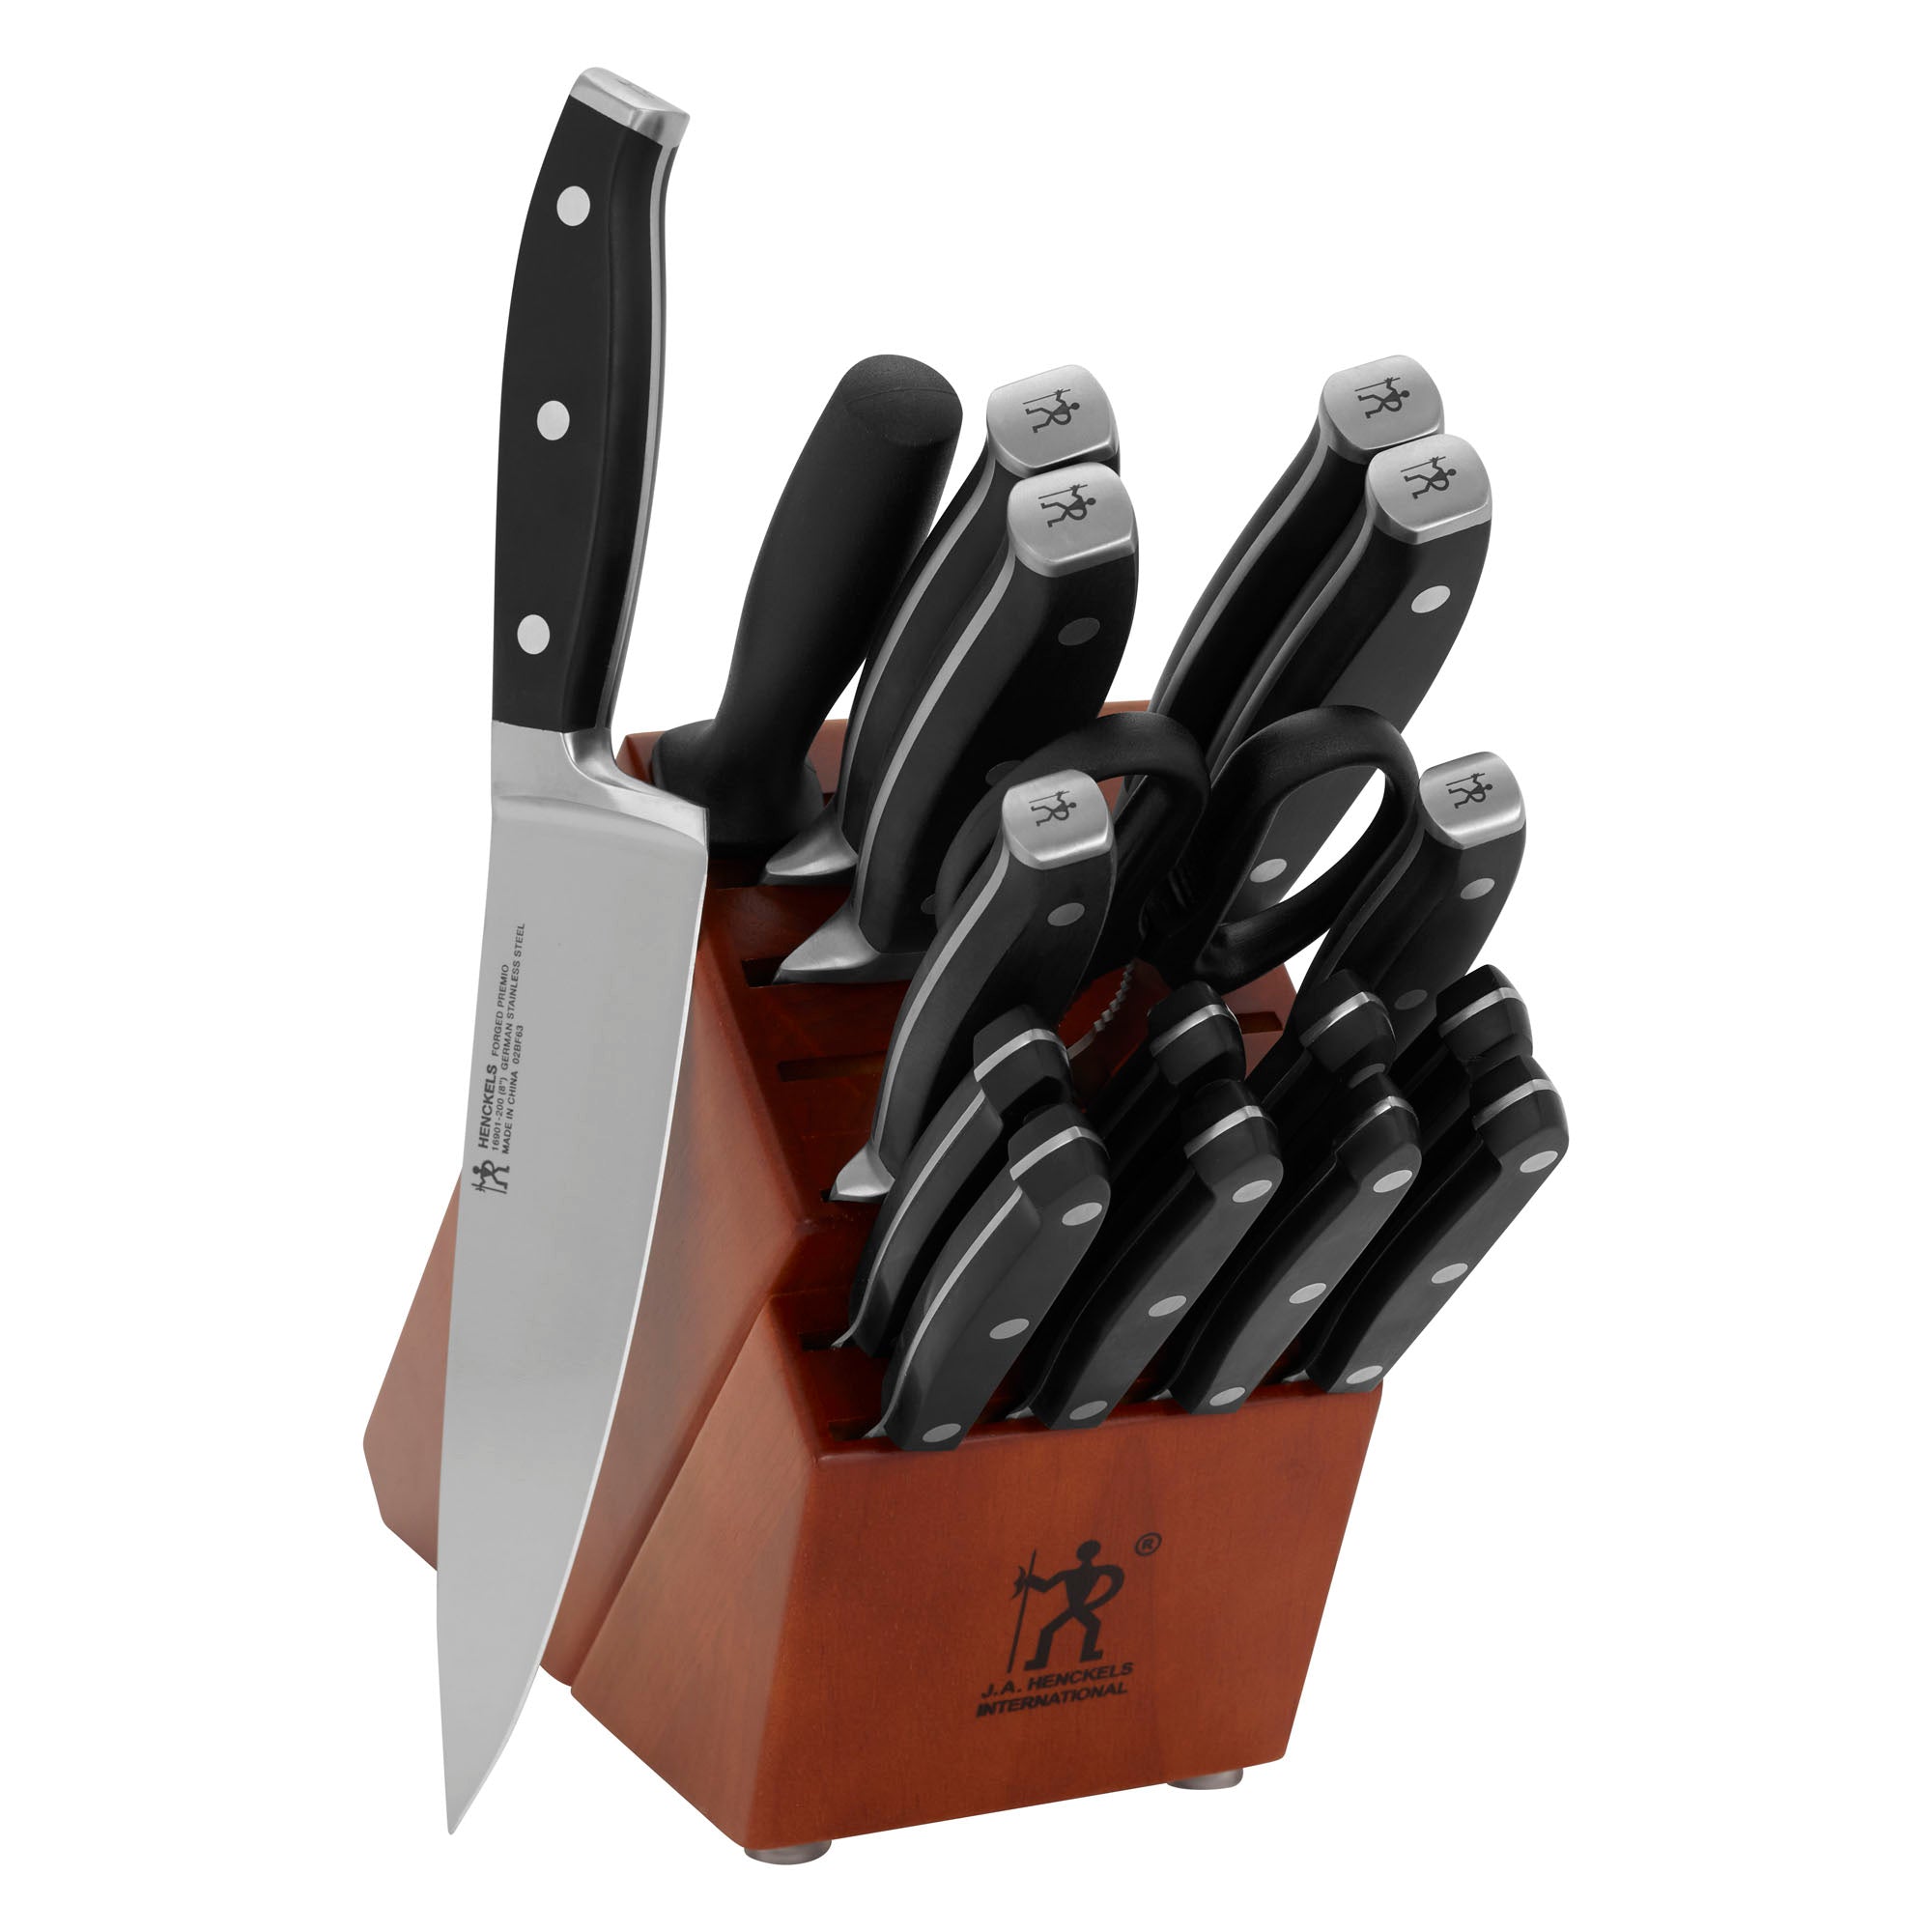 French Home 8-Piece Laguiole Kitchen Knife Set with Wood Block